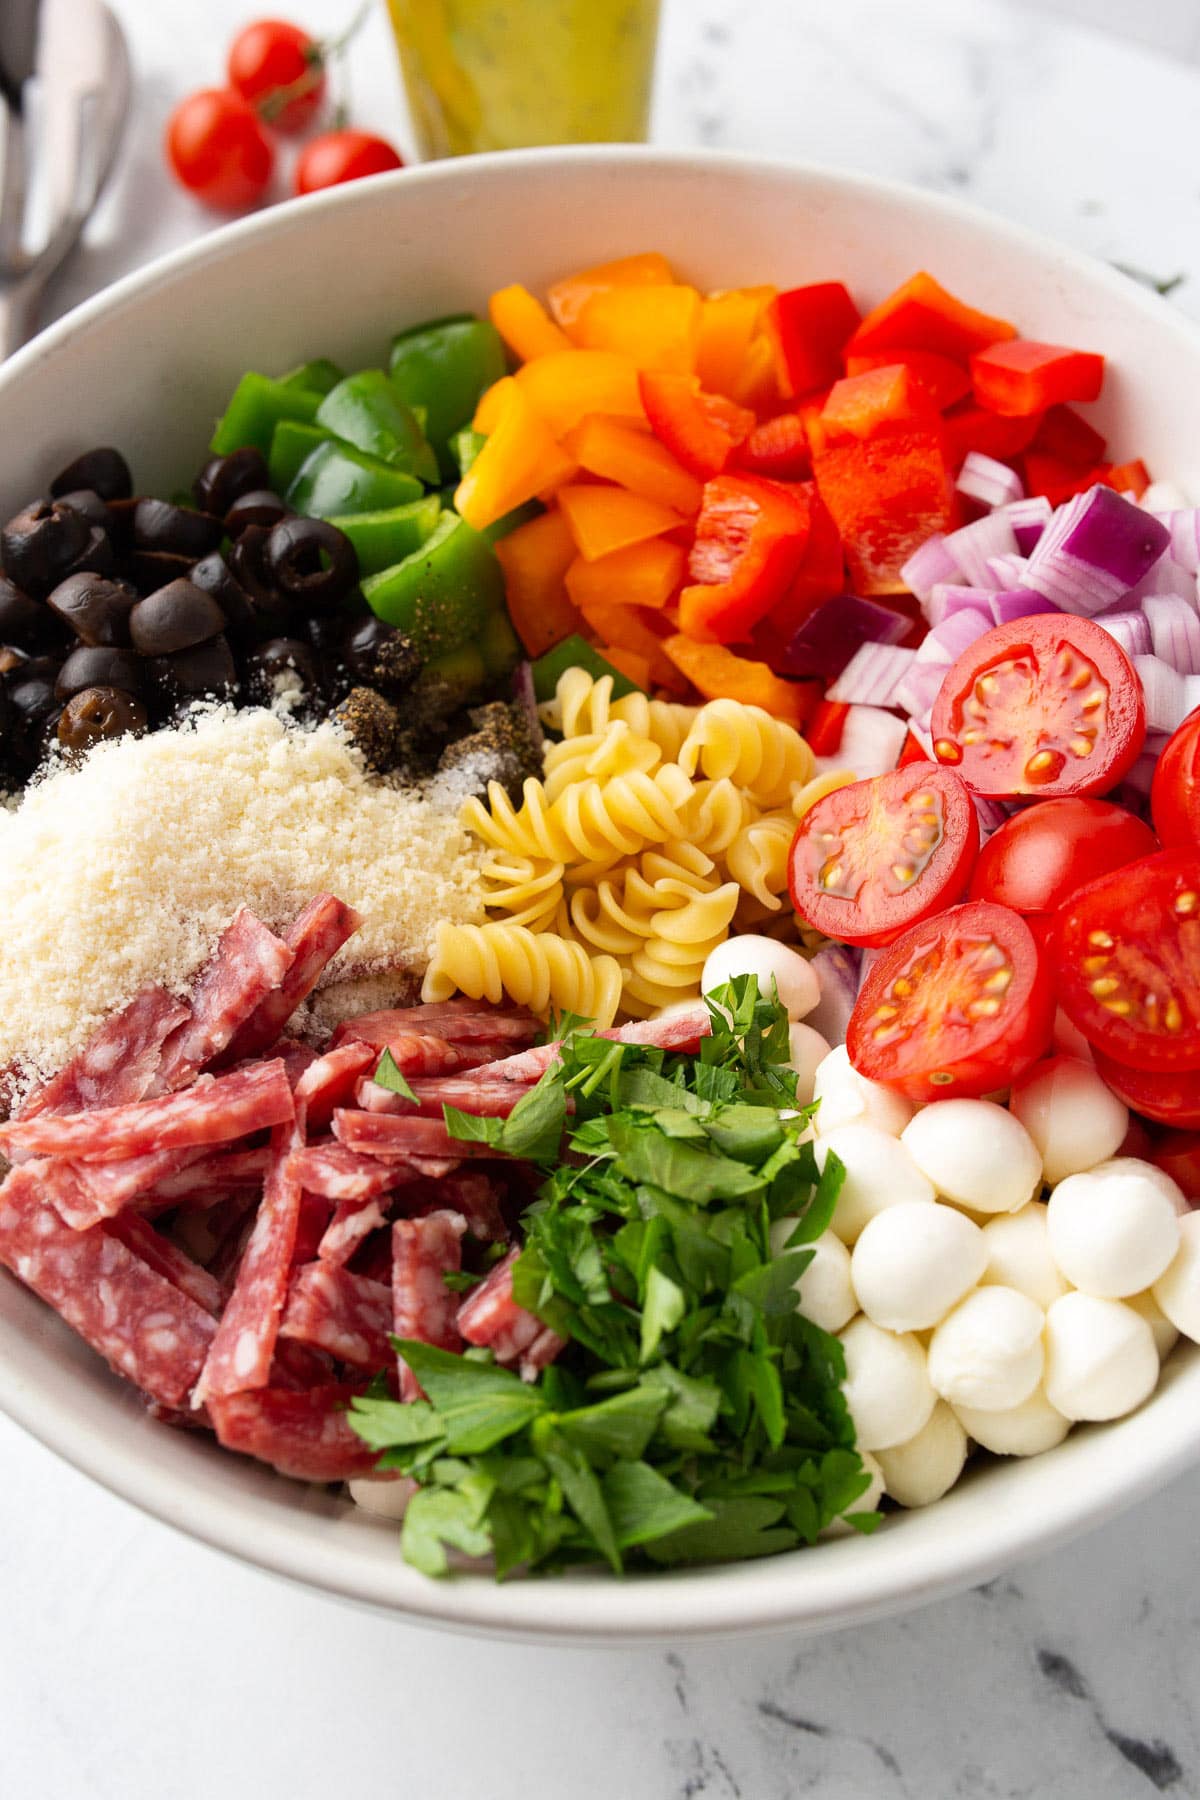 A large white mixing bowl full of ingredients for Italian pasta salad neatly arranged in colorful sections.